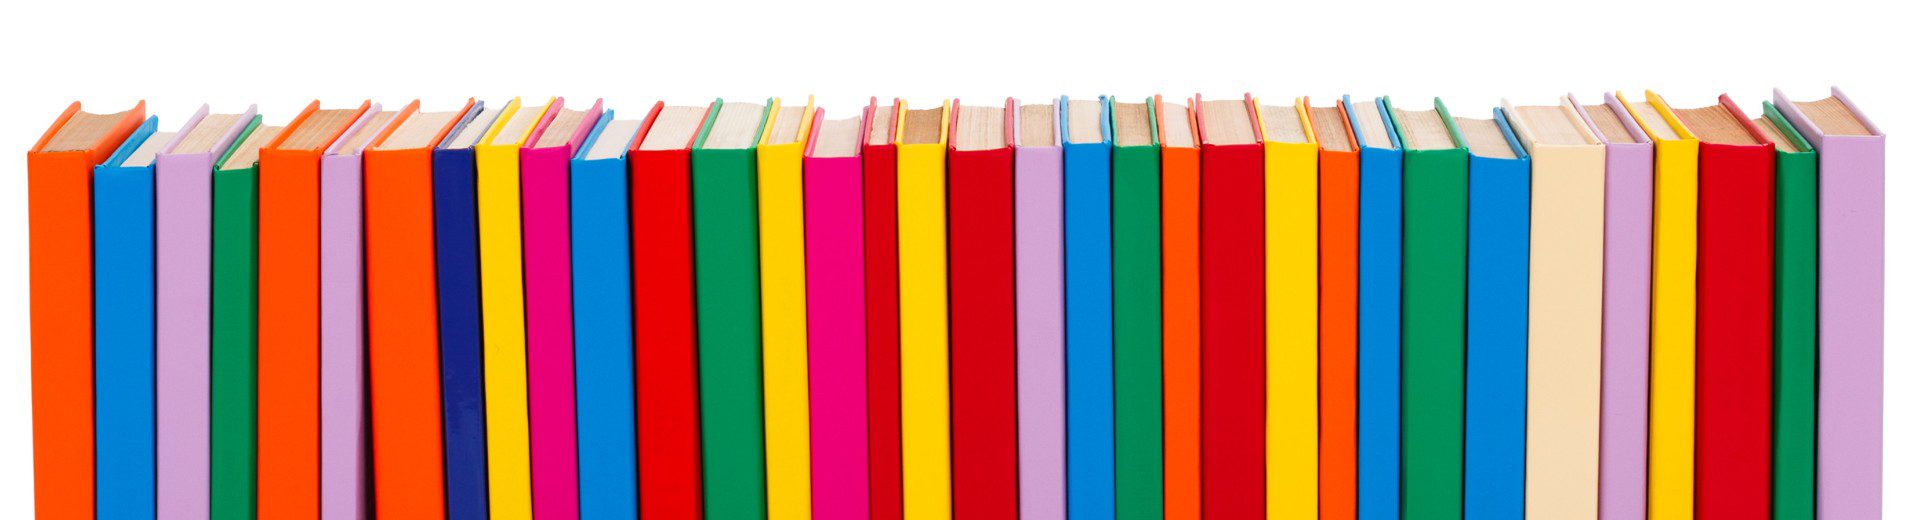 Long row of bright, multicolored books lined up